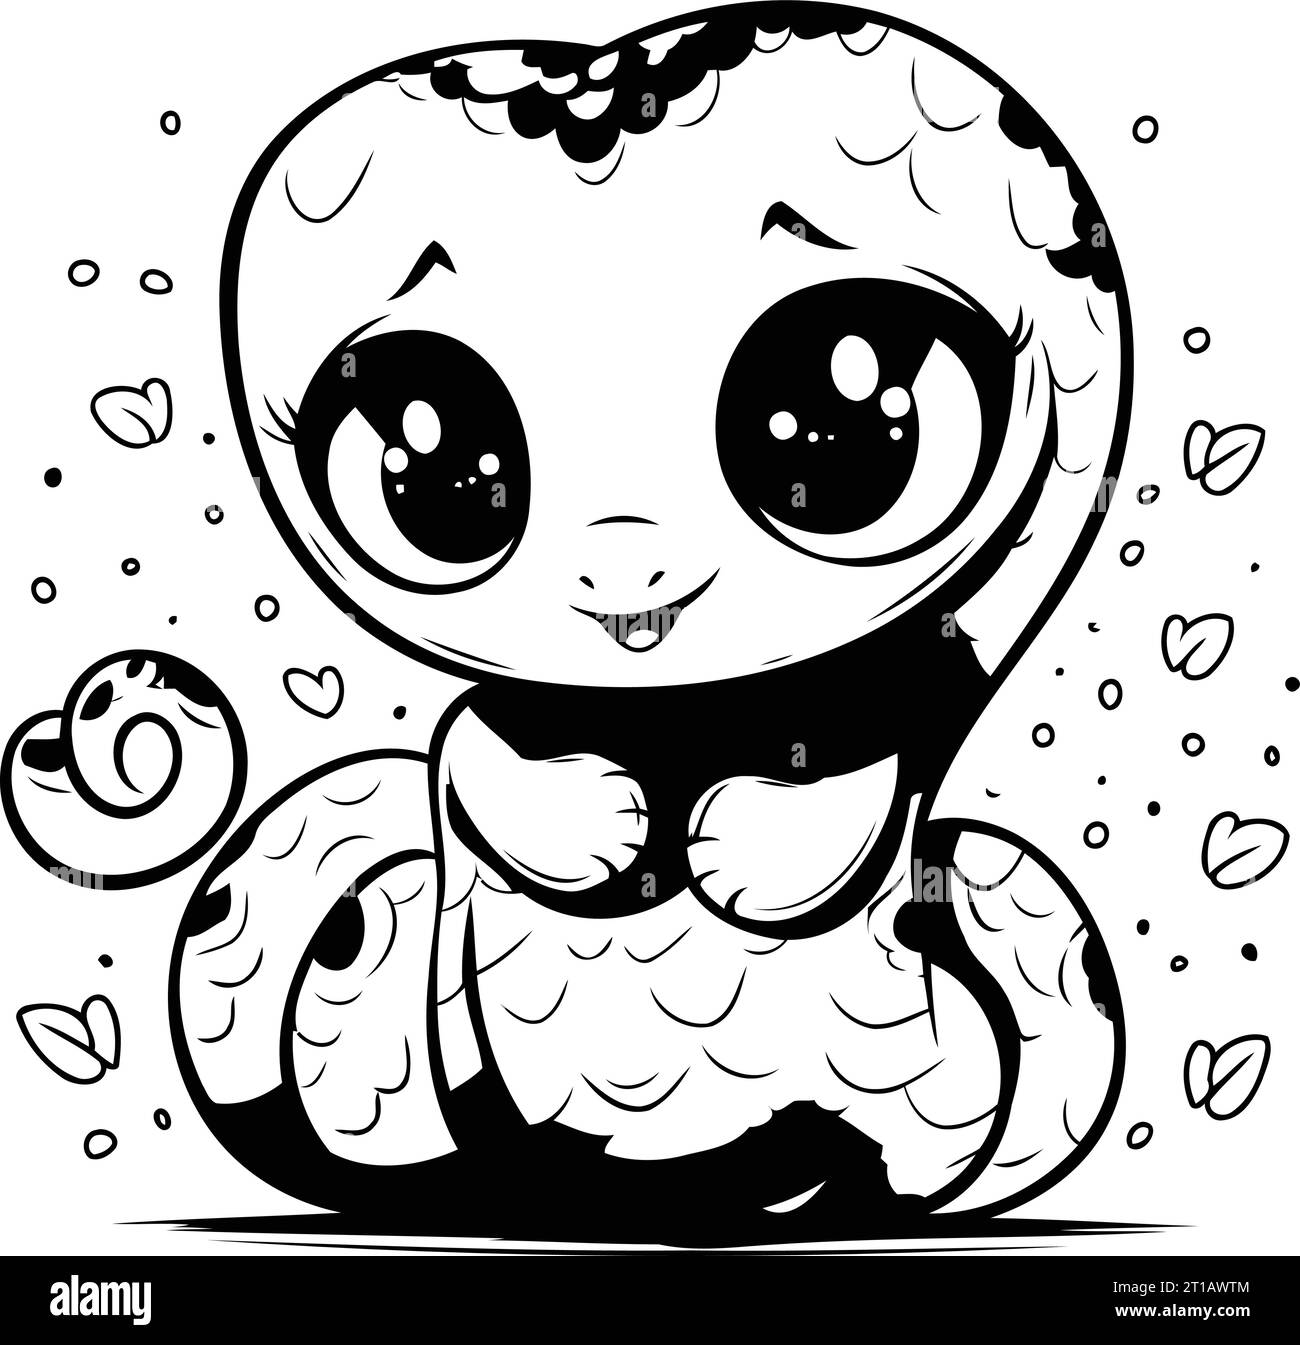 Cute cartoon snake. Black and white vector illustration for coloring book. Stock Vector